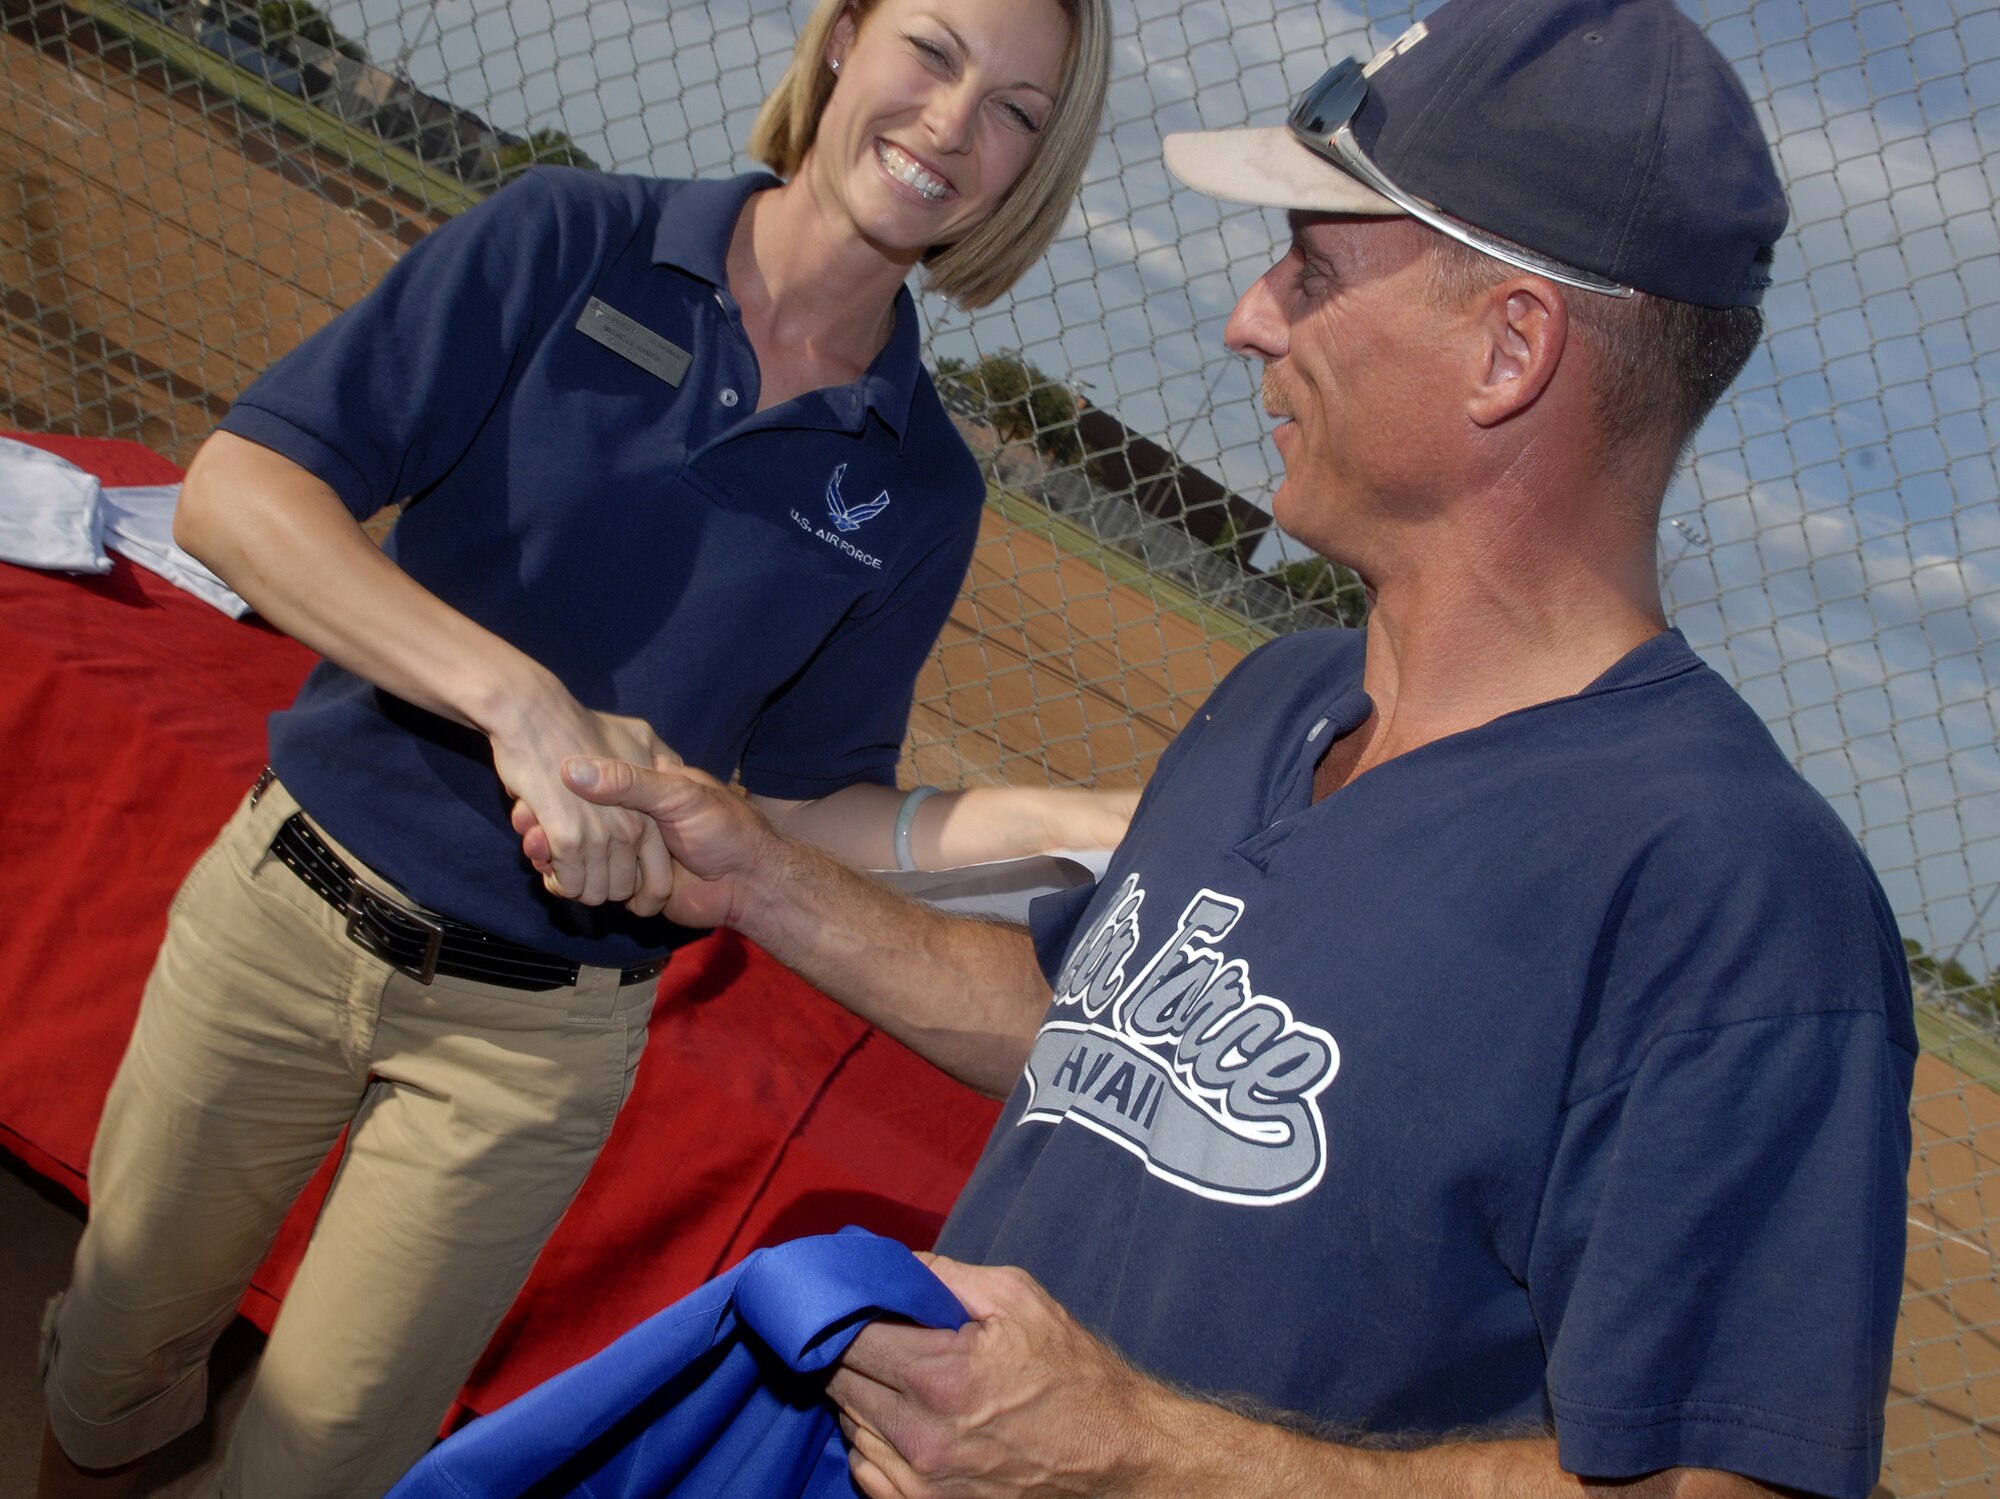 Charlie Rehburg, of the 17th Mission Support Group Junkyard Dogs, receives congratulations on being voted overall MVP for the 2008 Softball season by Goodfellow’s Sports Director Michelle Ammon. Rehburg was awarded a plaque and commemorative jersey for his outstanding athleticism. (U.S. Air Force photo by Senior Airman Kamaile Chan)